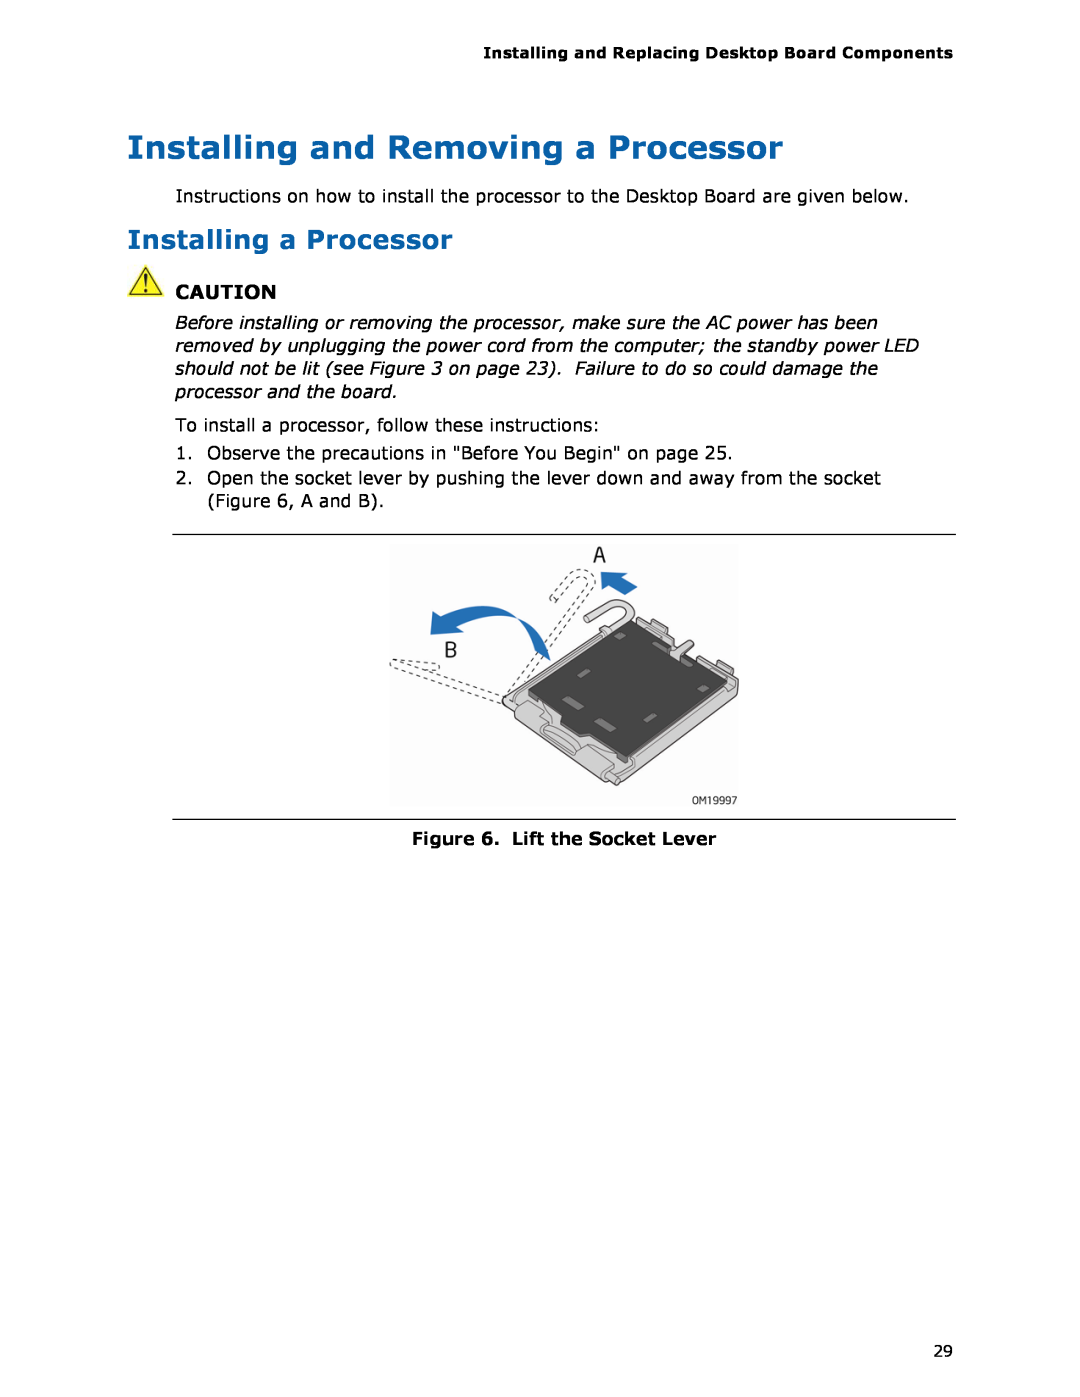 Intel DG33FB manual Installing and Removing a Processor, Installing a Processor, Lift the Socket Lever 